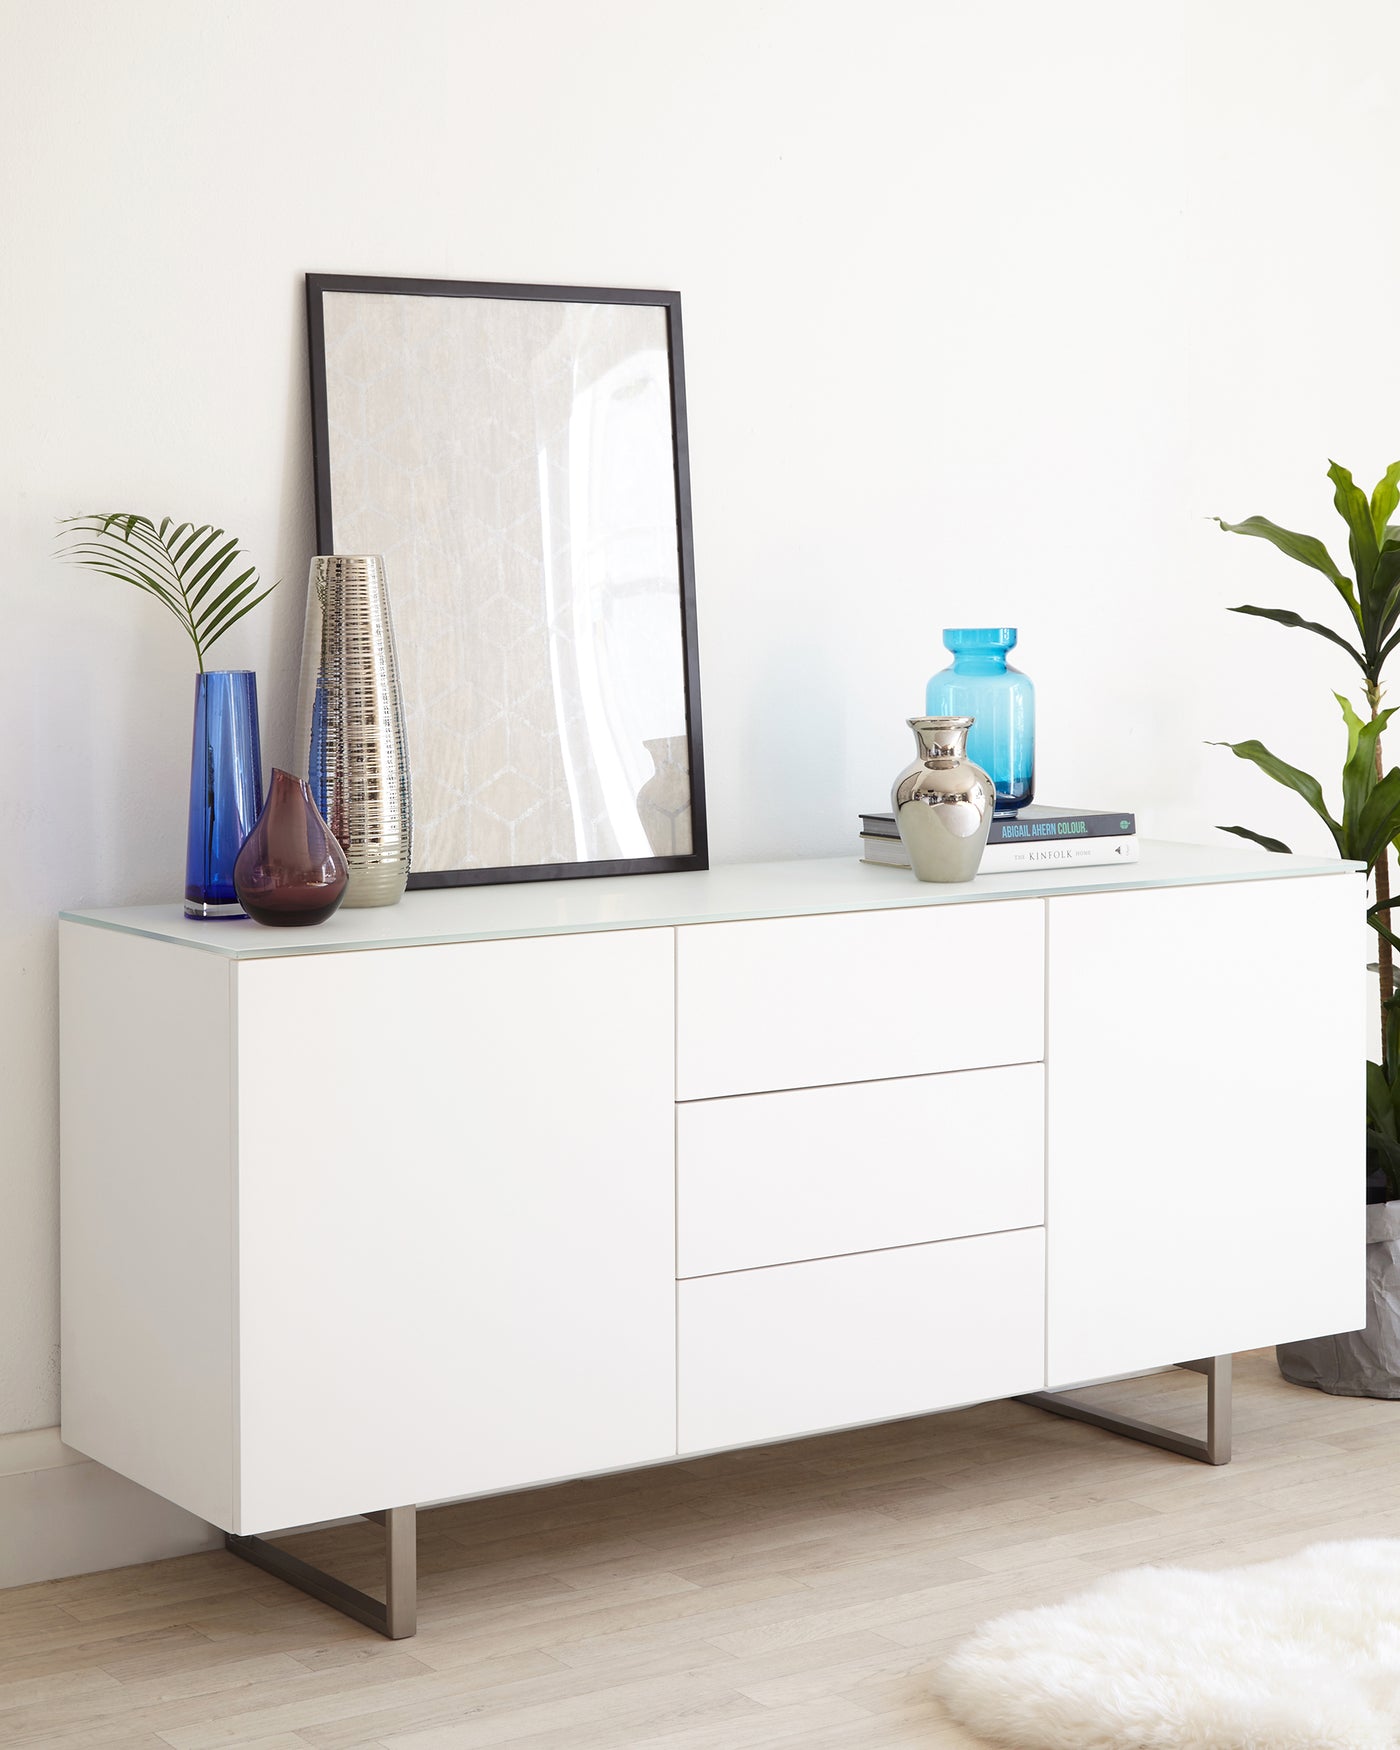 Modern white sideboard with sleek lines and metal leg accents. Features two cabinet doors and three drawers for storage, with a glossy finish. The top surface is decorated with various vases and a framed artwork.